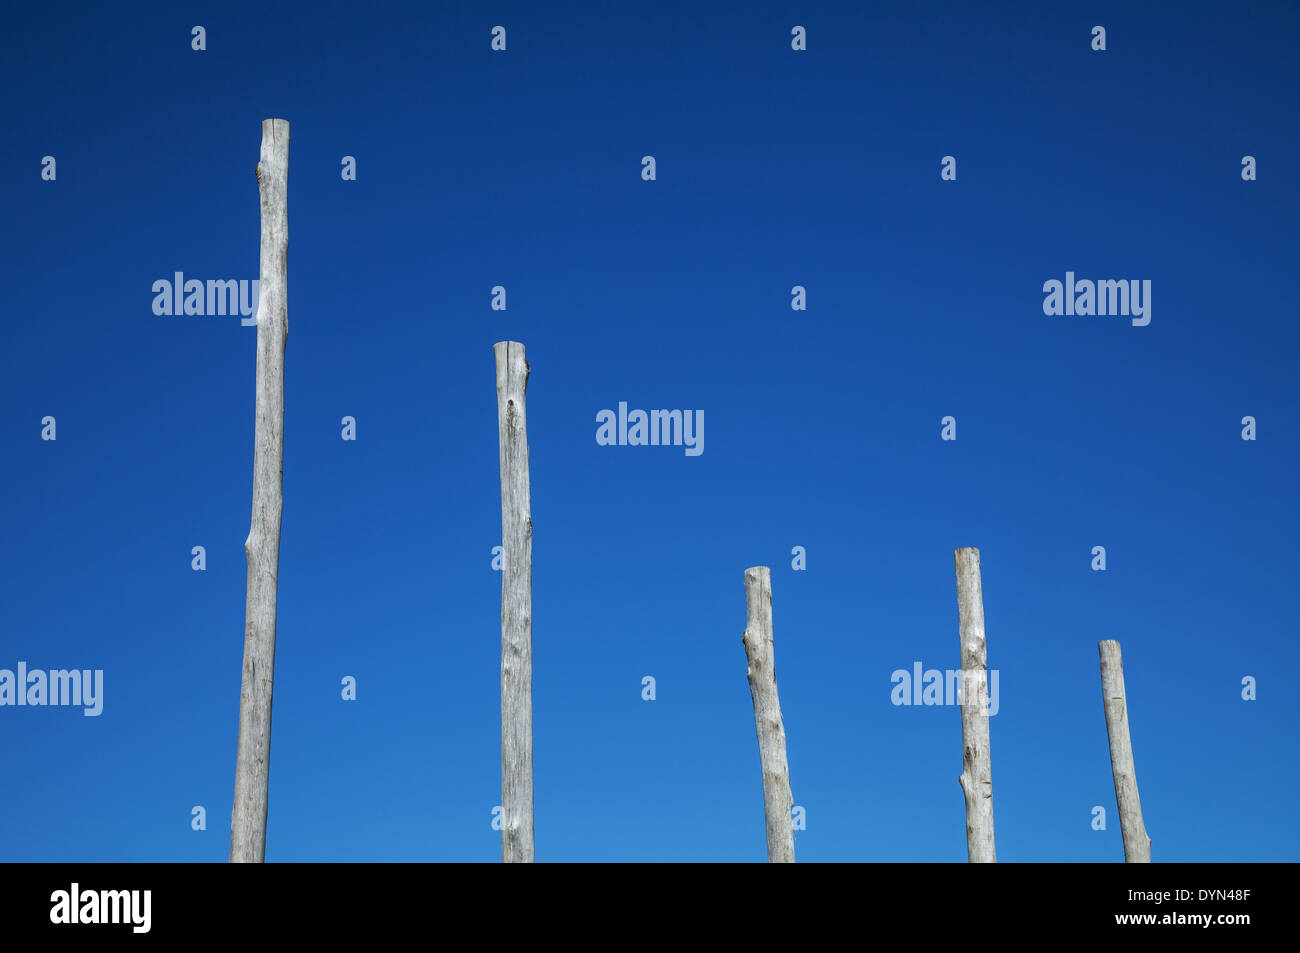 A series of timber poles against a blue sky that resembles a graph Stock Photo